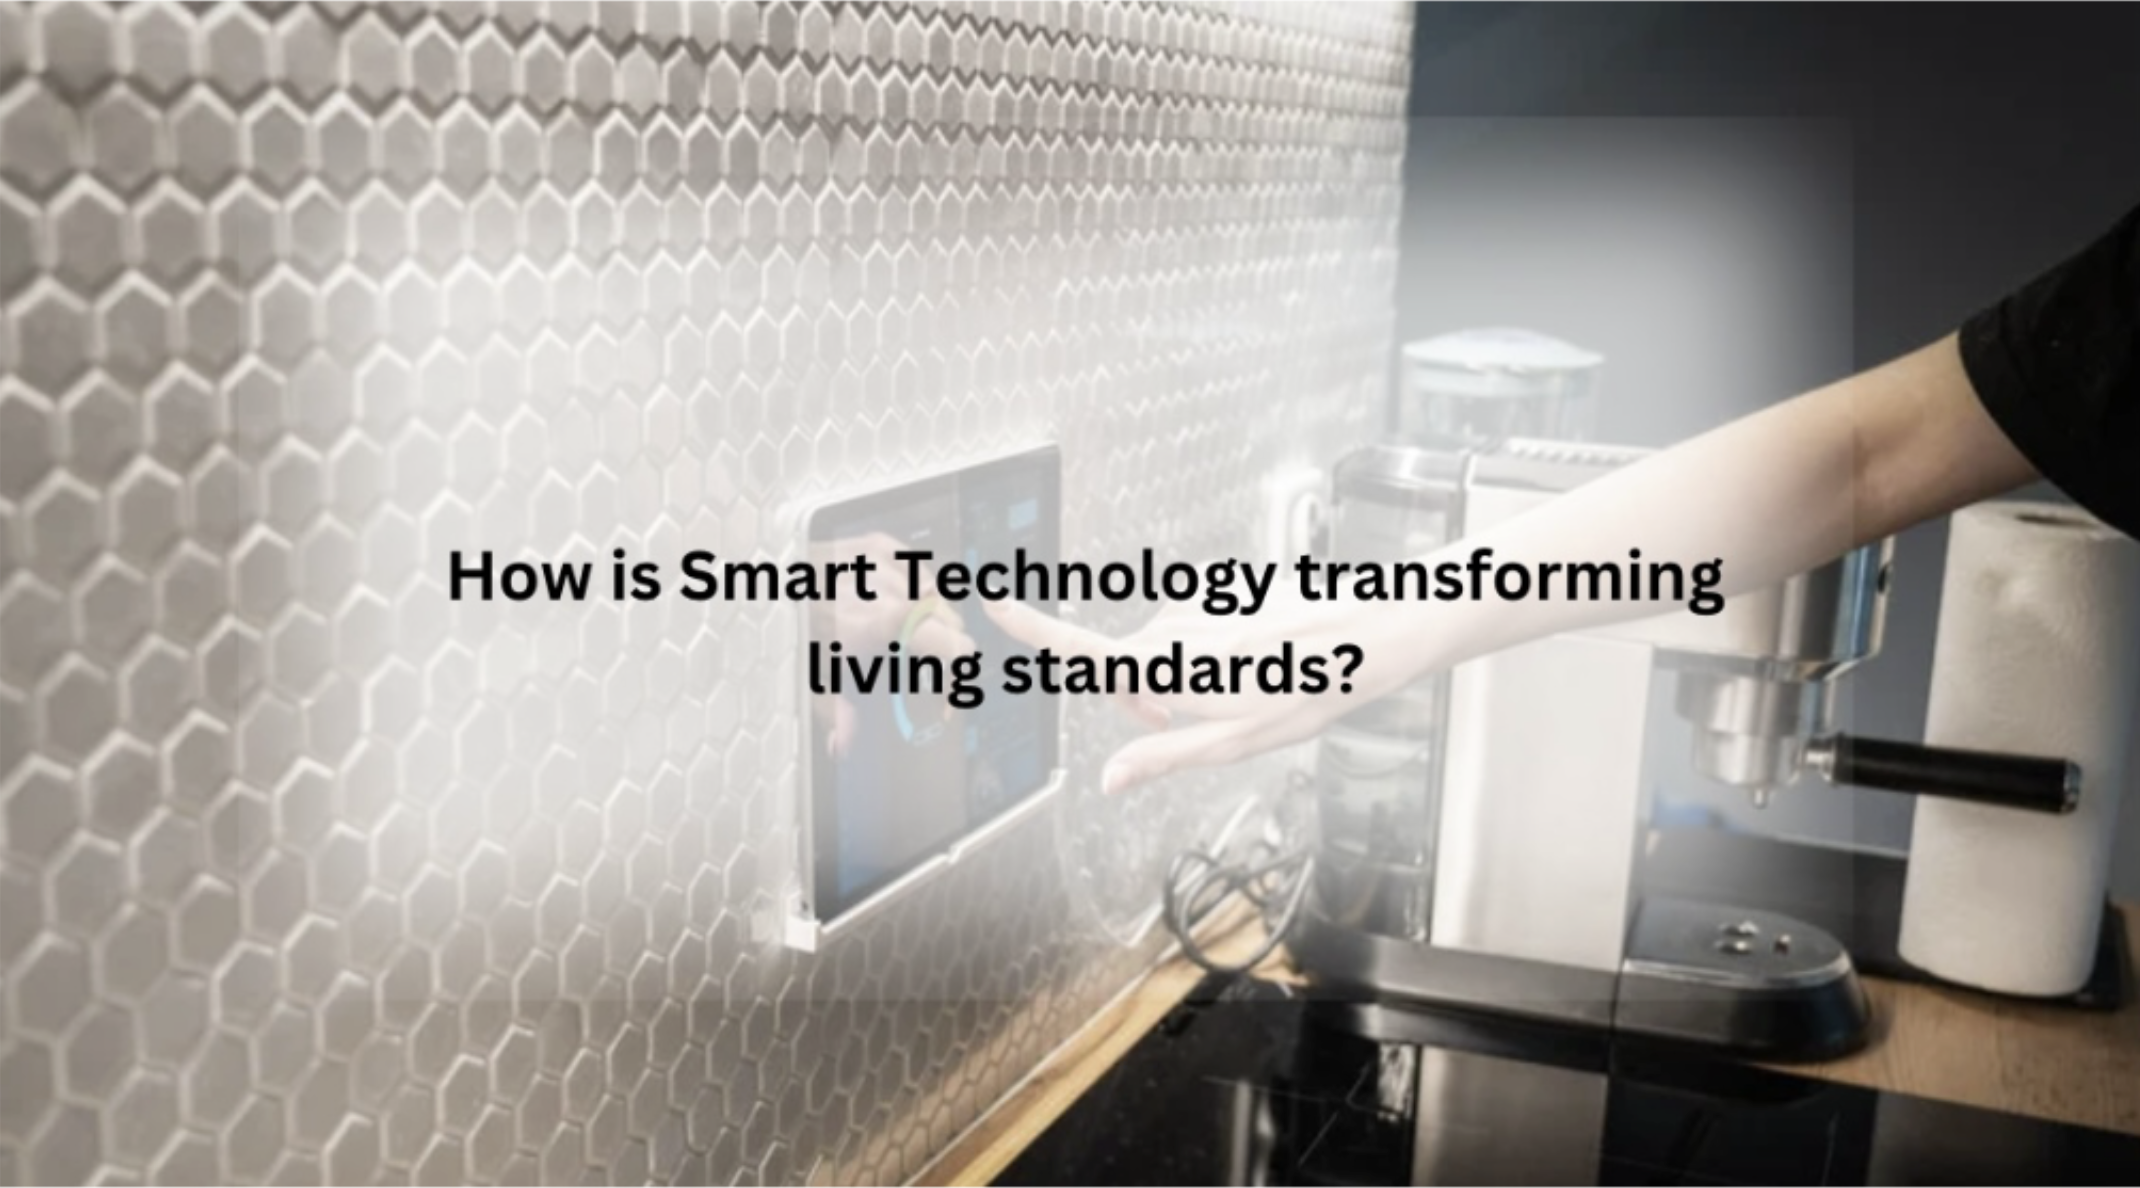 How is Smart Technology transforming living standards?